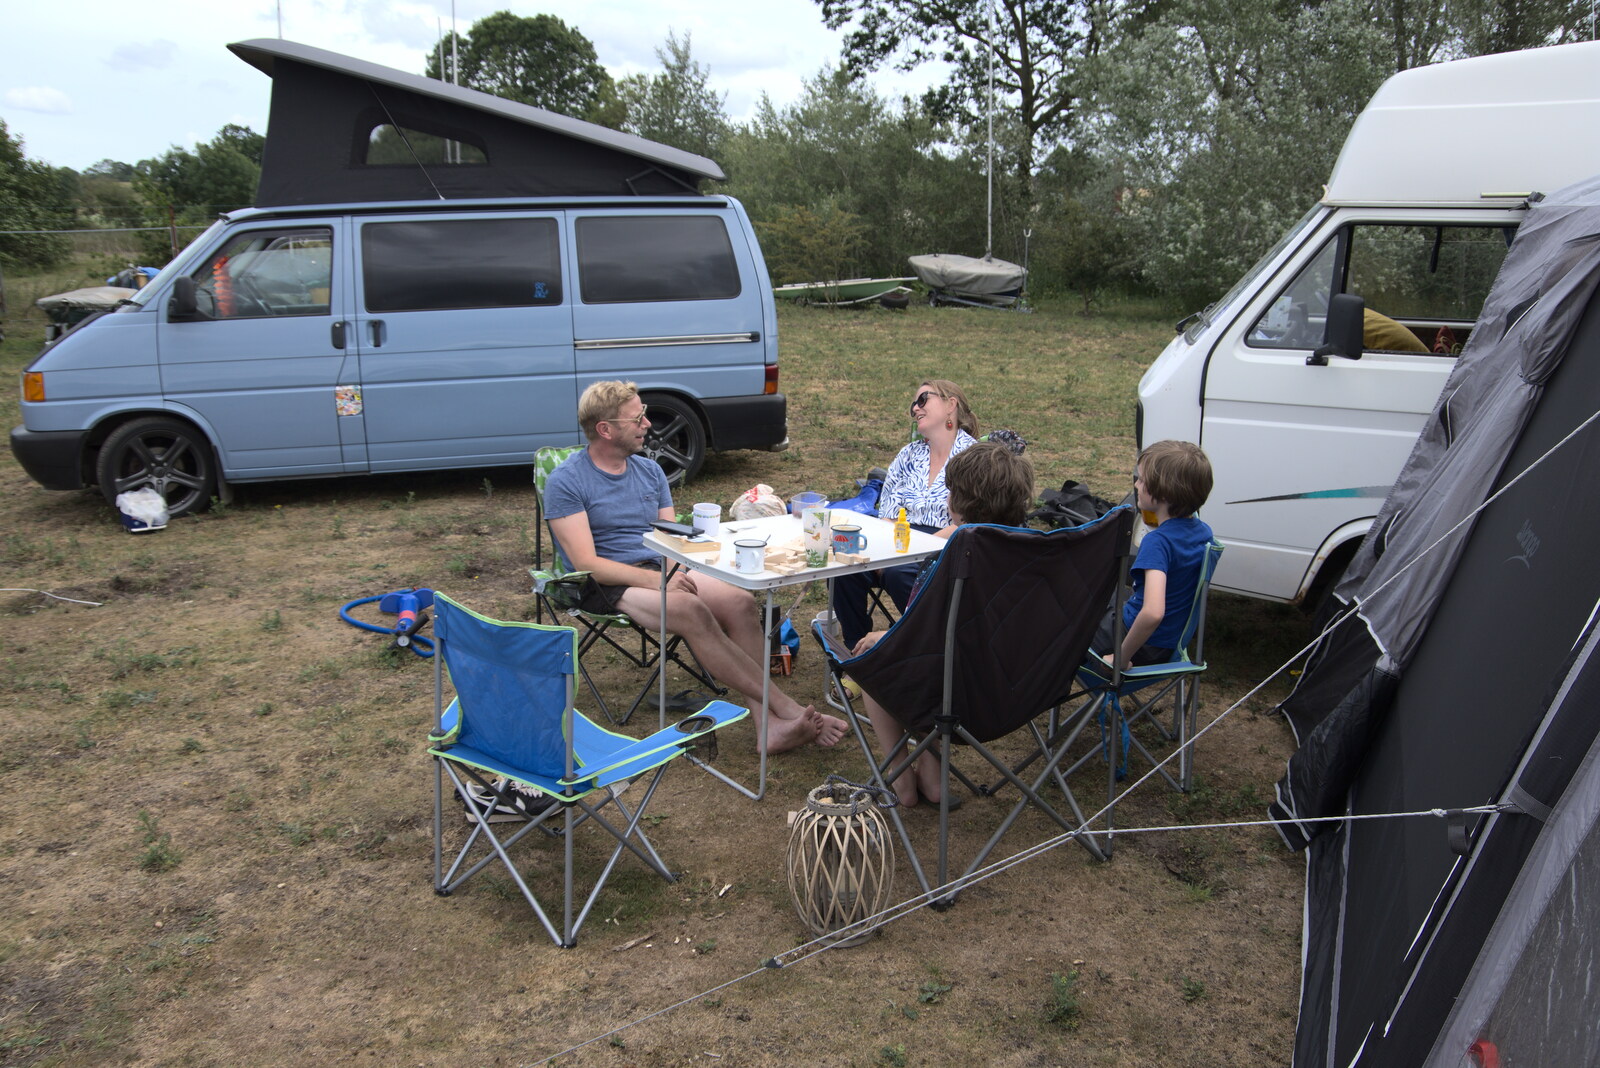 It's time for tea from Camping at the Lake, Weybread, Harleston - 25th June 2022